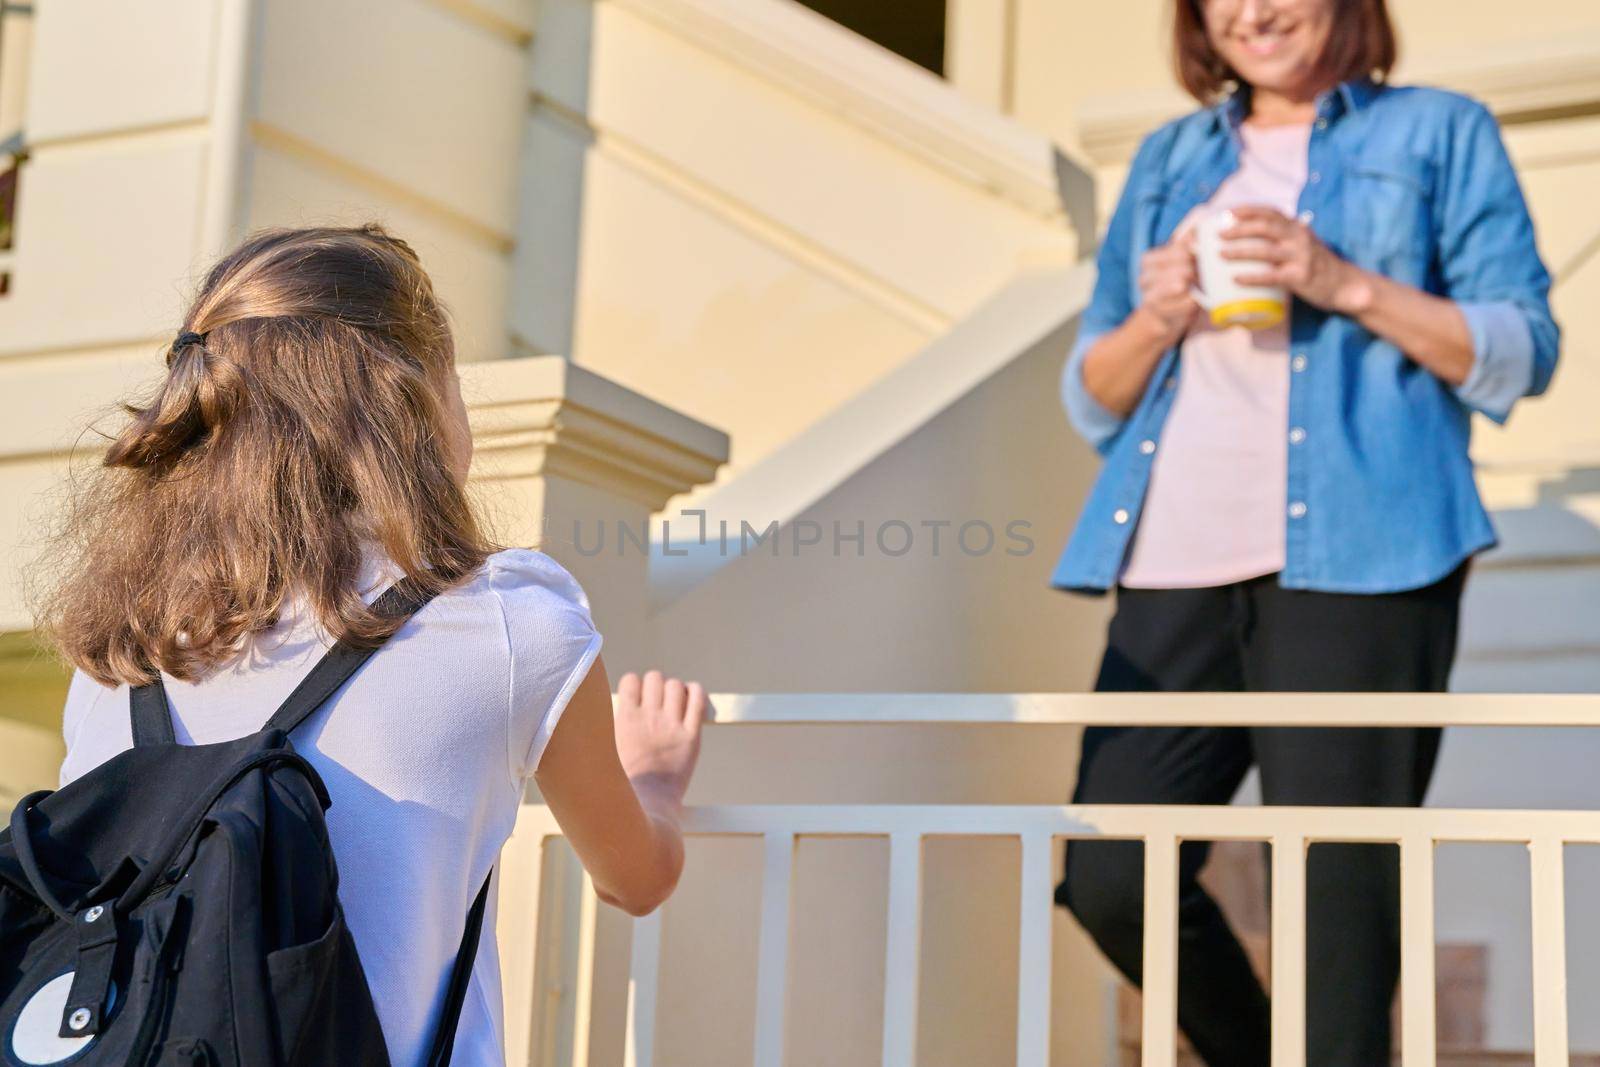 Girl student with backpack on porch of house with mother. Child going to school in morning, mom standing on outdoor steps of house saying goodbye and good day. Family, back to school, parent child